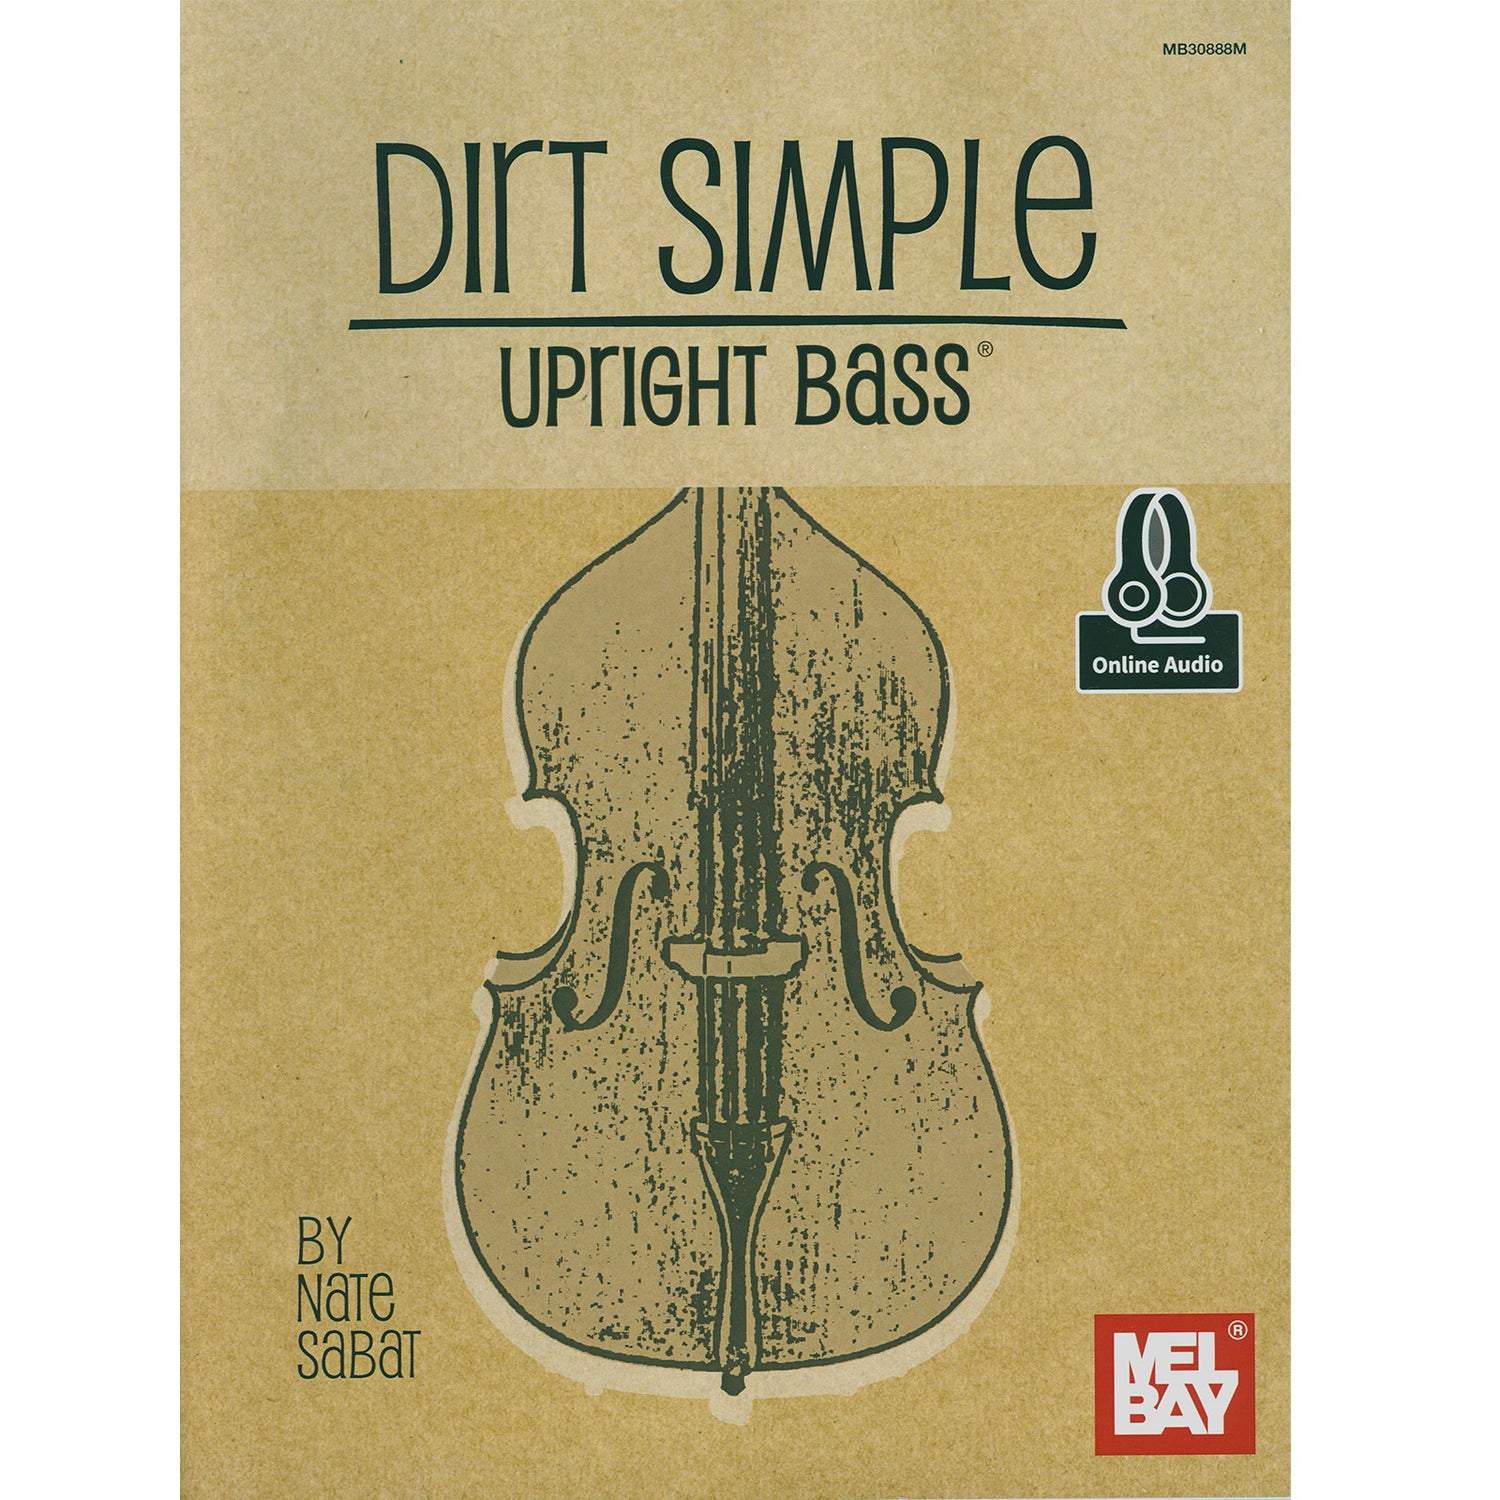 Image 1 of Dirt Simple Upright Bass - SKU# 02-30888M : Product Type Media : Elderly Instruments